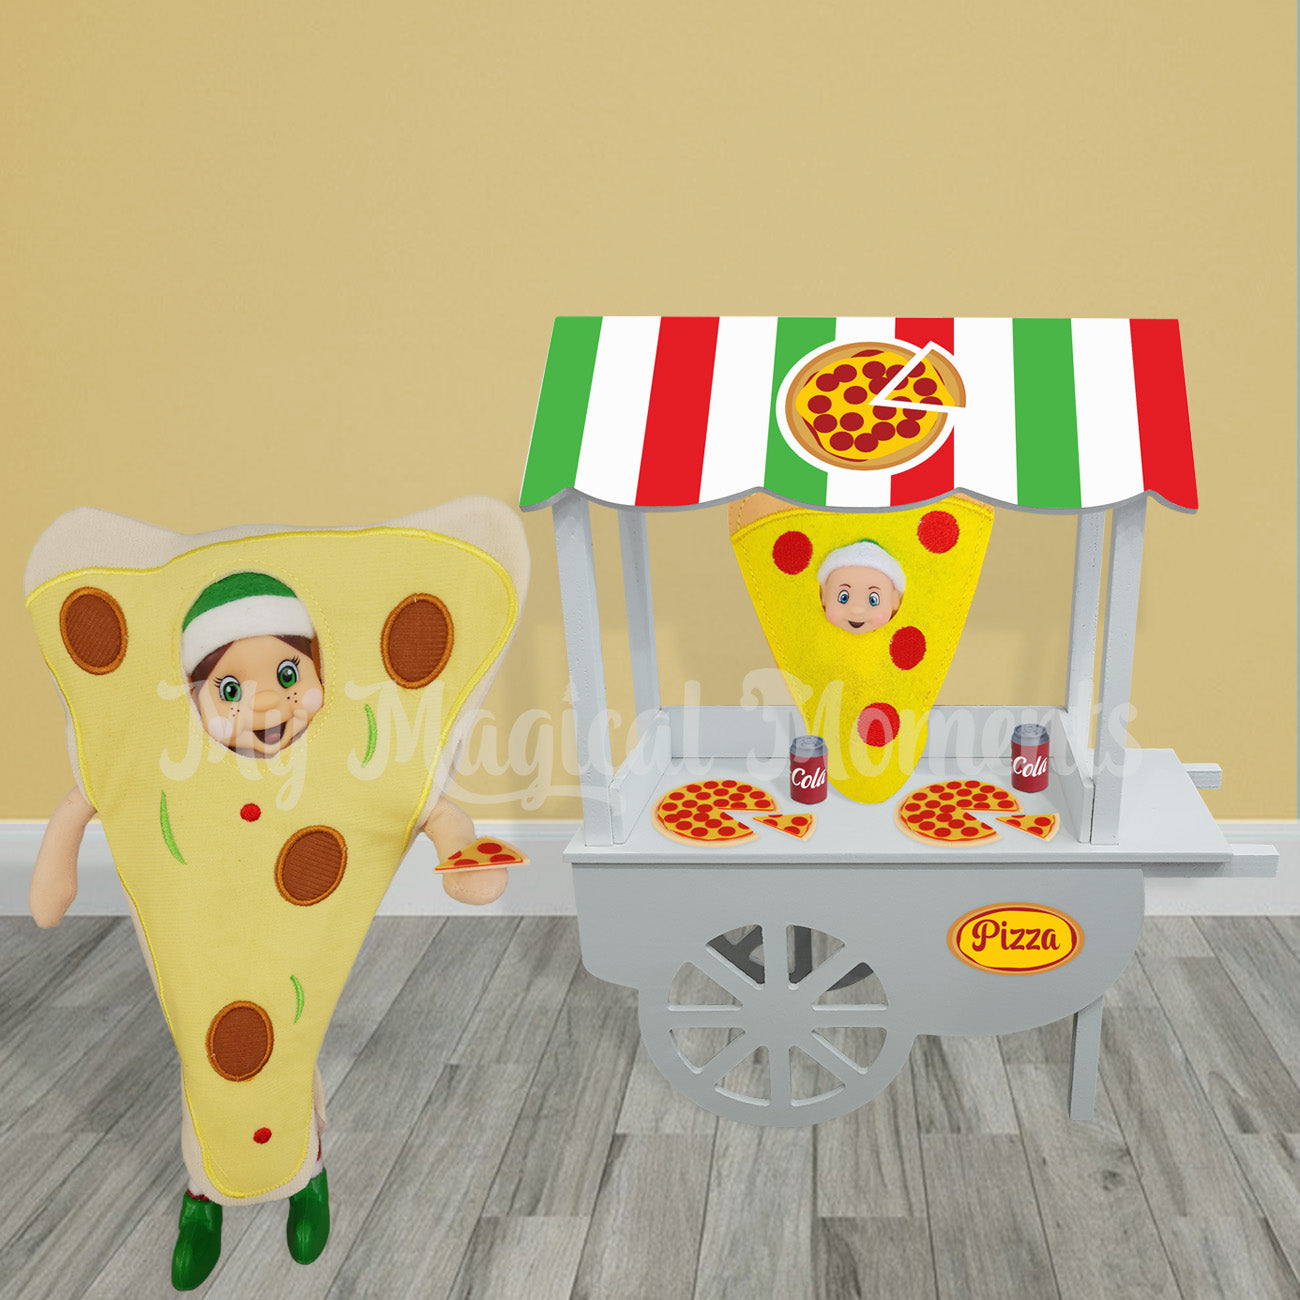 Elf dressed as a pizza selling pizza with an elf baby wearing a pepperoni pie outfit